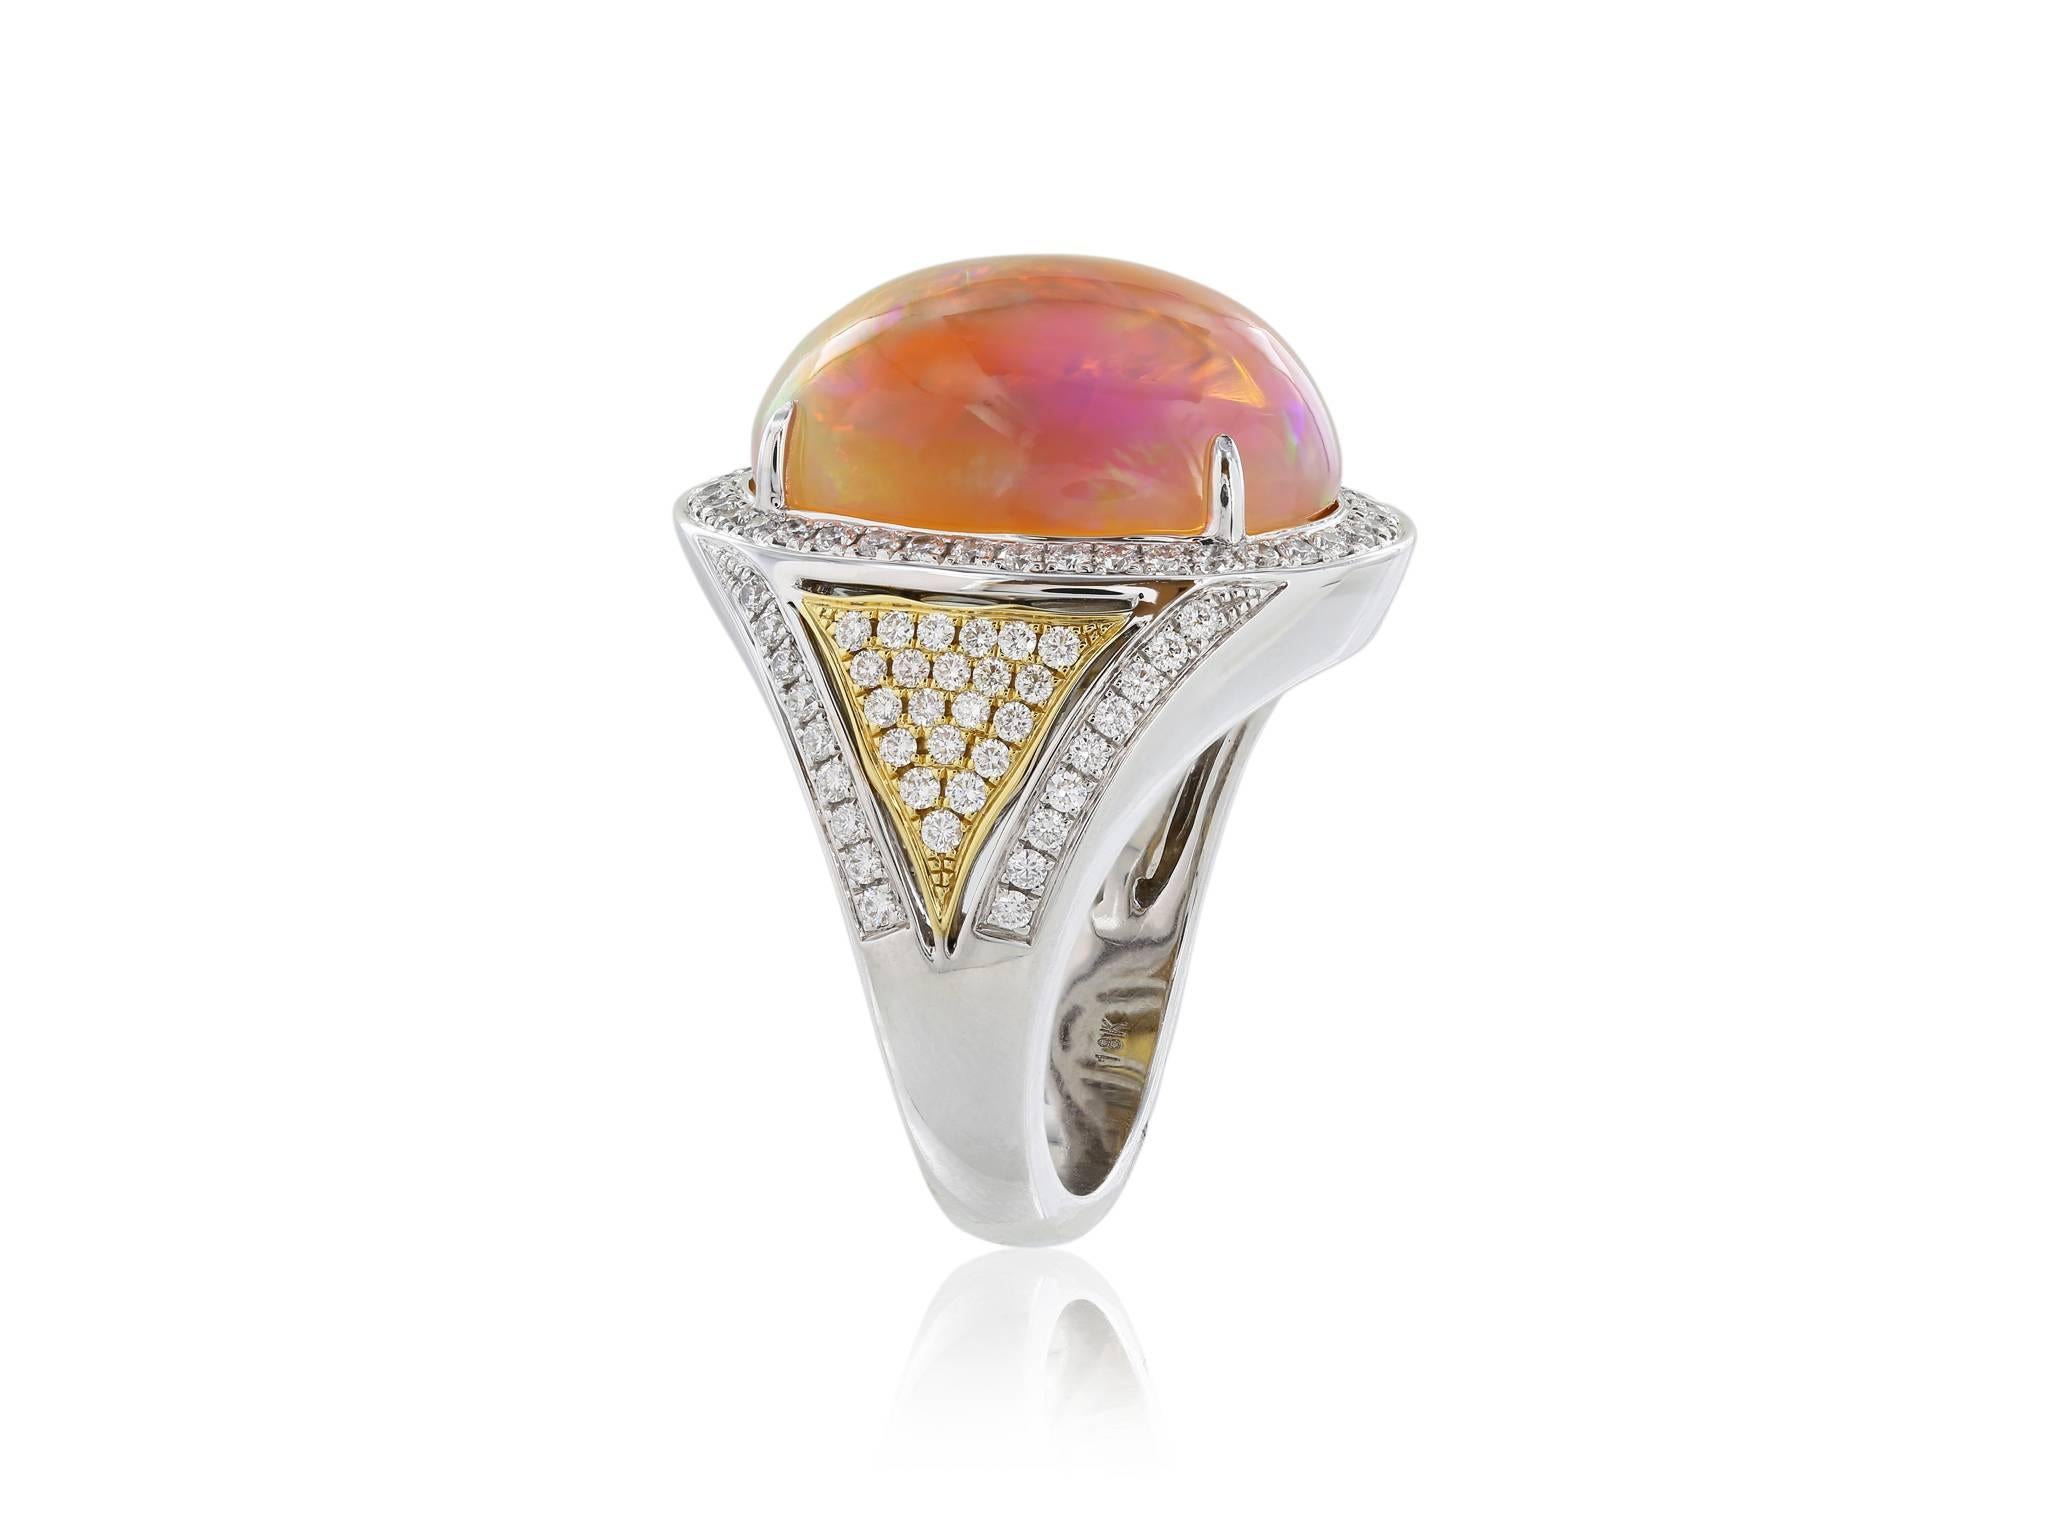 18 karat two-tone white and yellow gold ring featuring  1 cabochon orange opal weighing 12.36 carats. The oval opal is surrounded by pave set diamonds. The shoulders have a YG triangle bezel filled with pave set diamonds and white gold shank is also